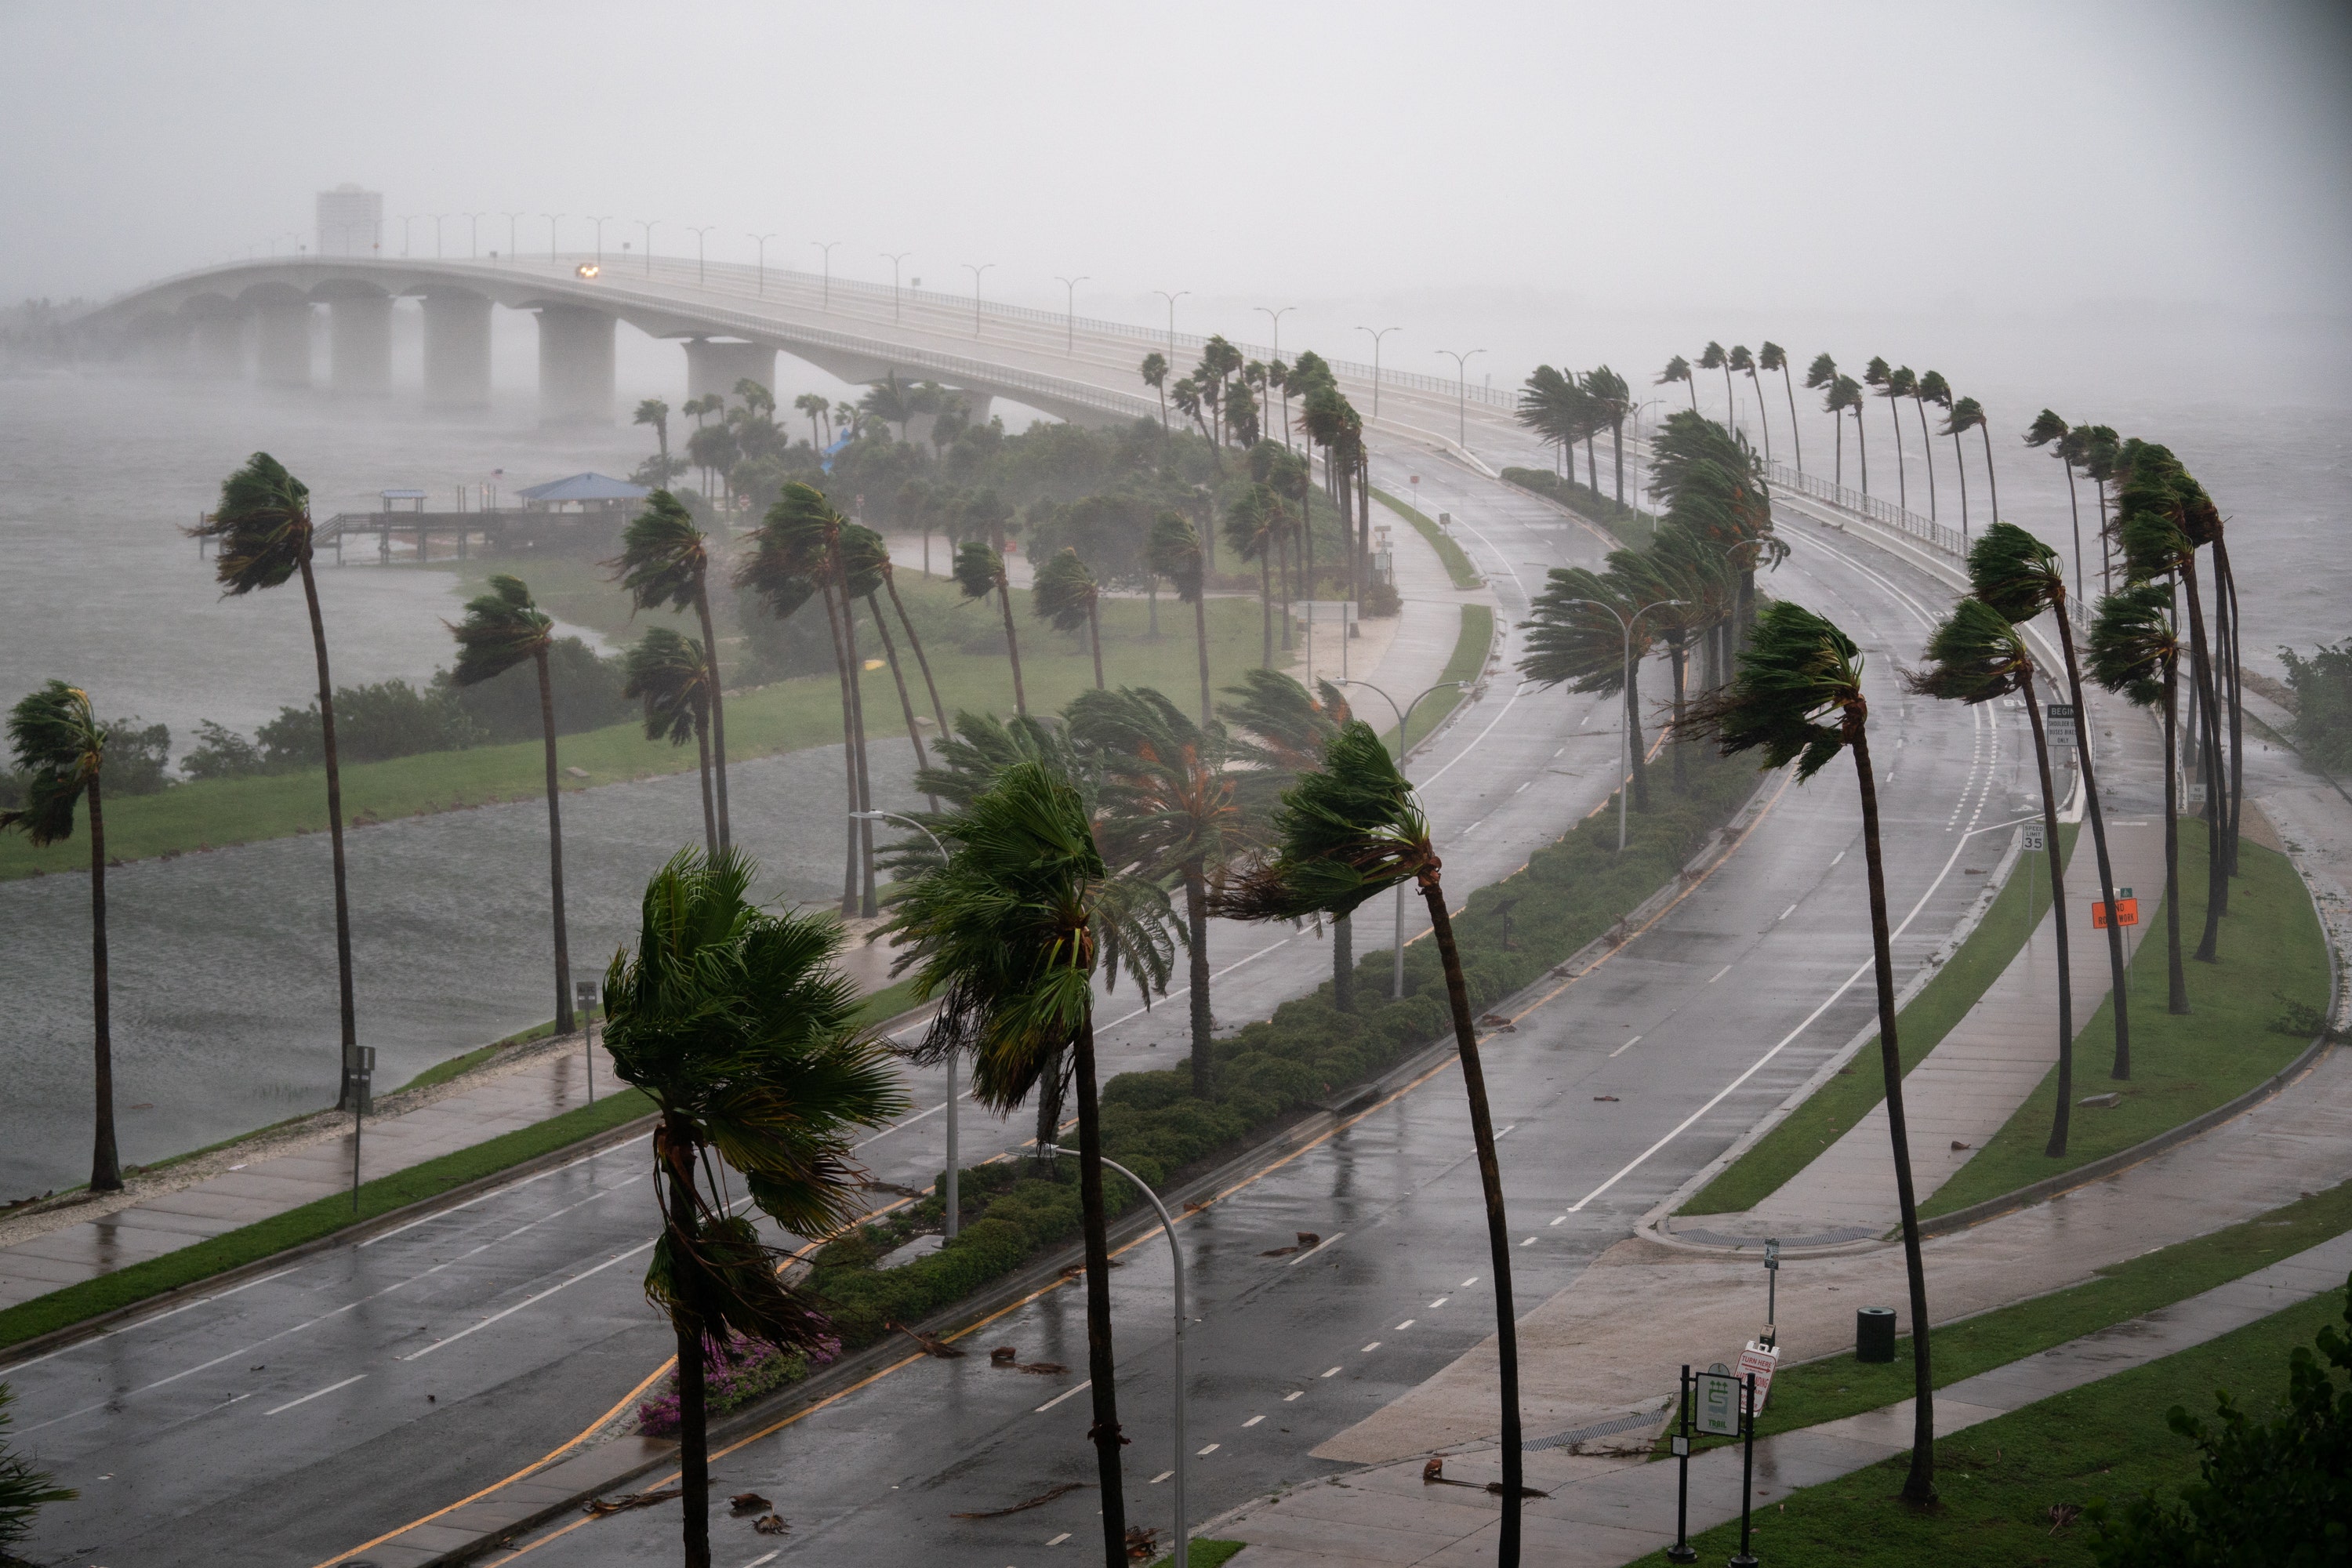 Hurricane season is here. It's a reminder that climate and clean energy deserve Republican support